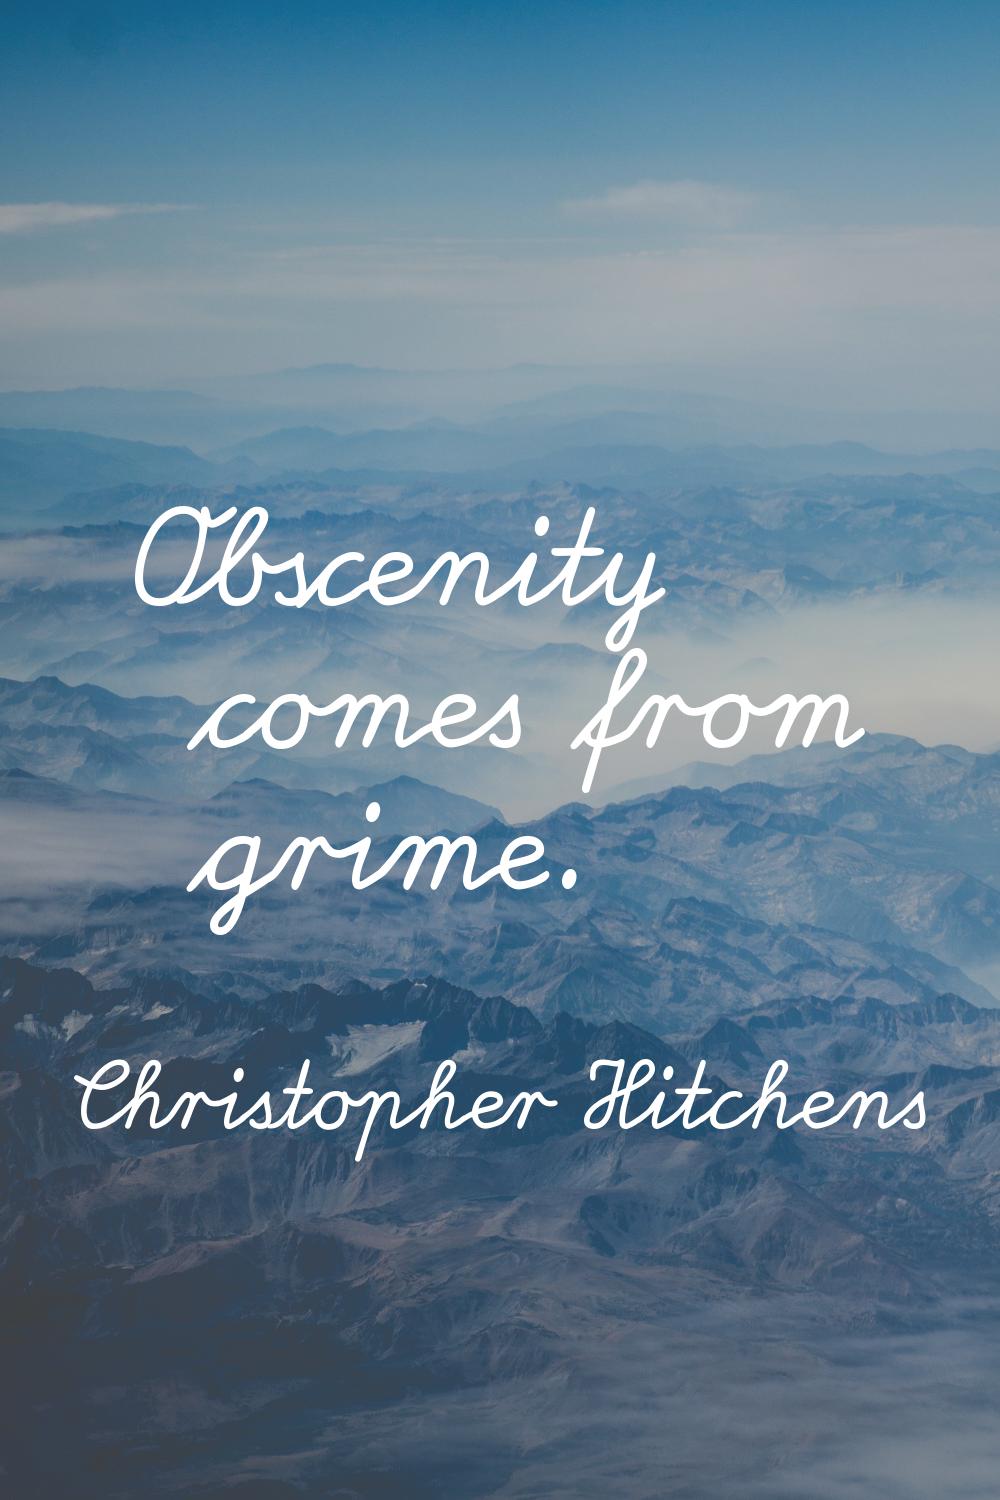 Obscenity comes from grime.